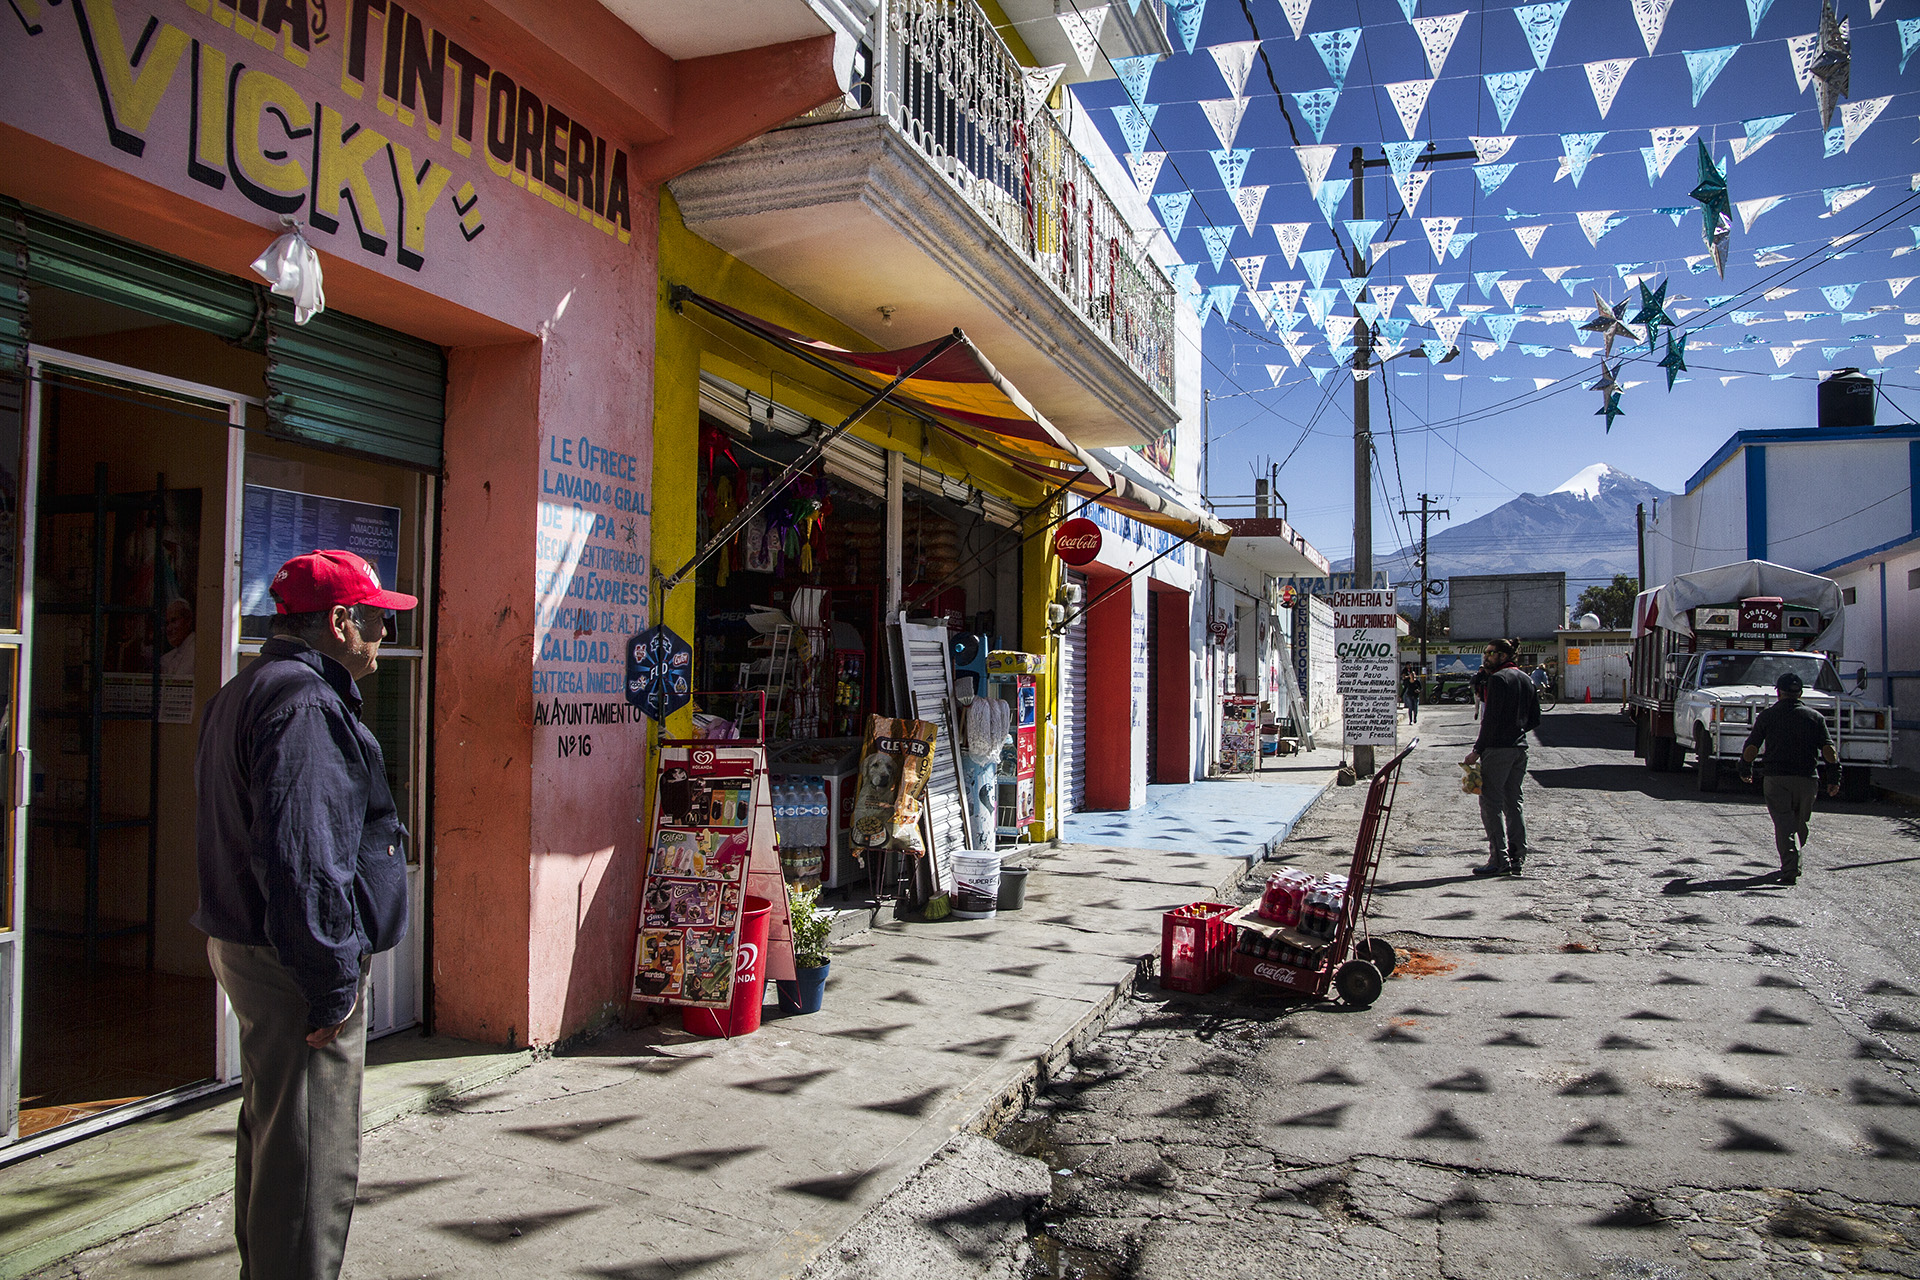  To try to blend in as an ice-axe-wielding, six-foot gringo carrying two jugs of water and a roll of toilet paper through the center of a small Mexican mountain town is a fruitless endeavor. We venture out anyway. The morning is bright as the village